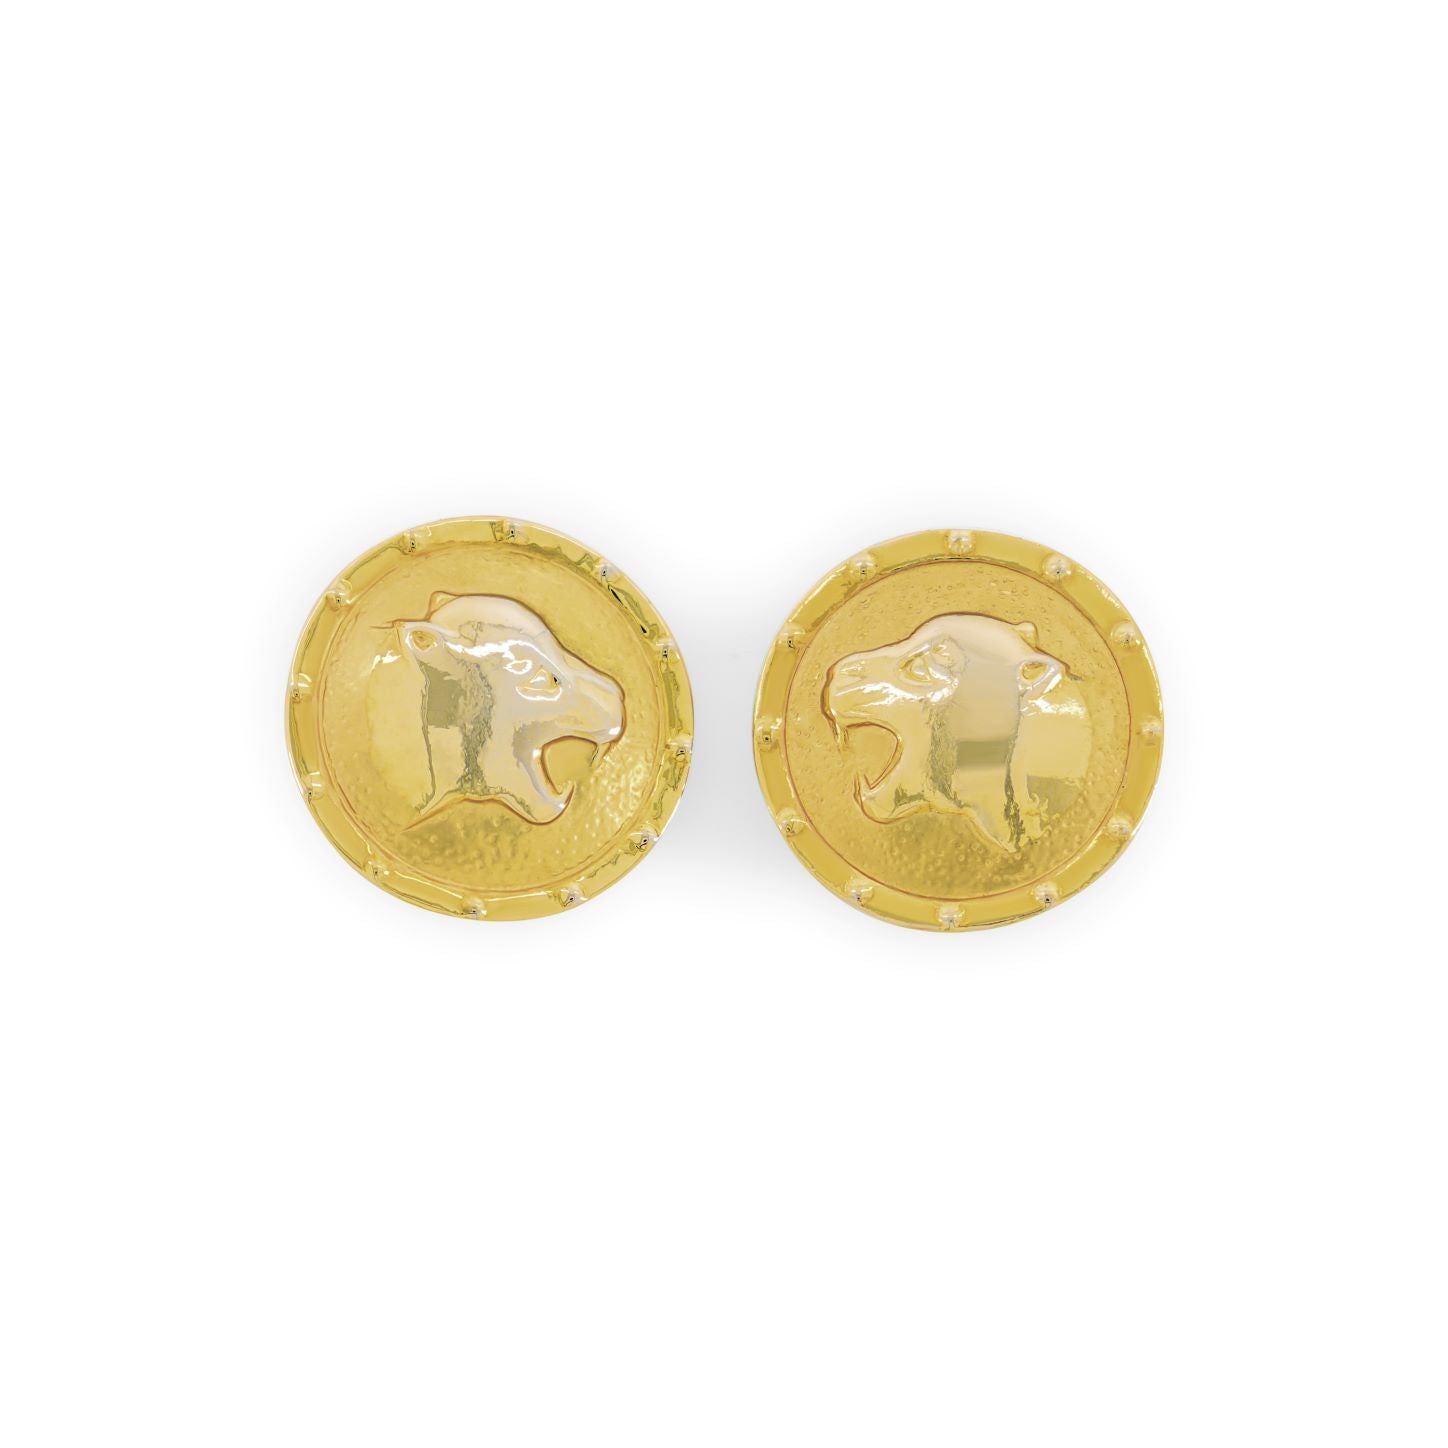 Costume leopard head button clip-on earrings from the 1980s-1990s